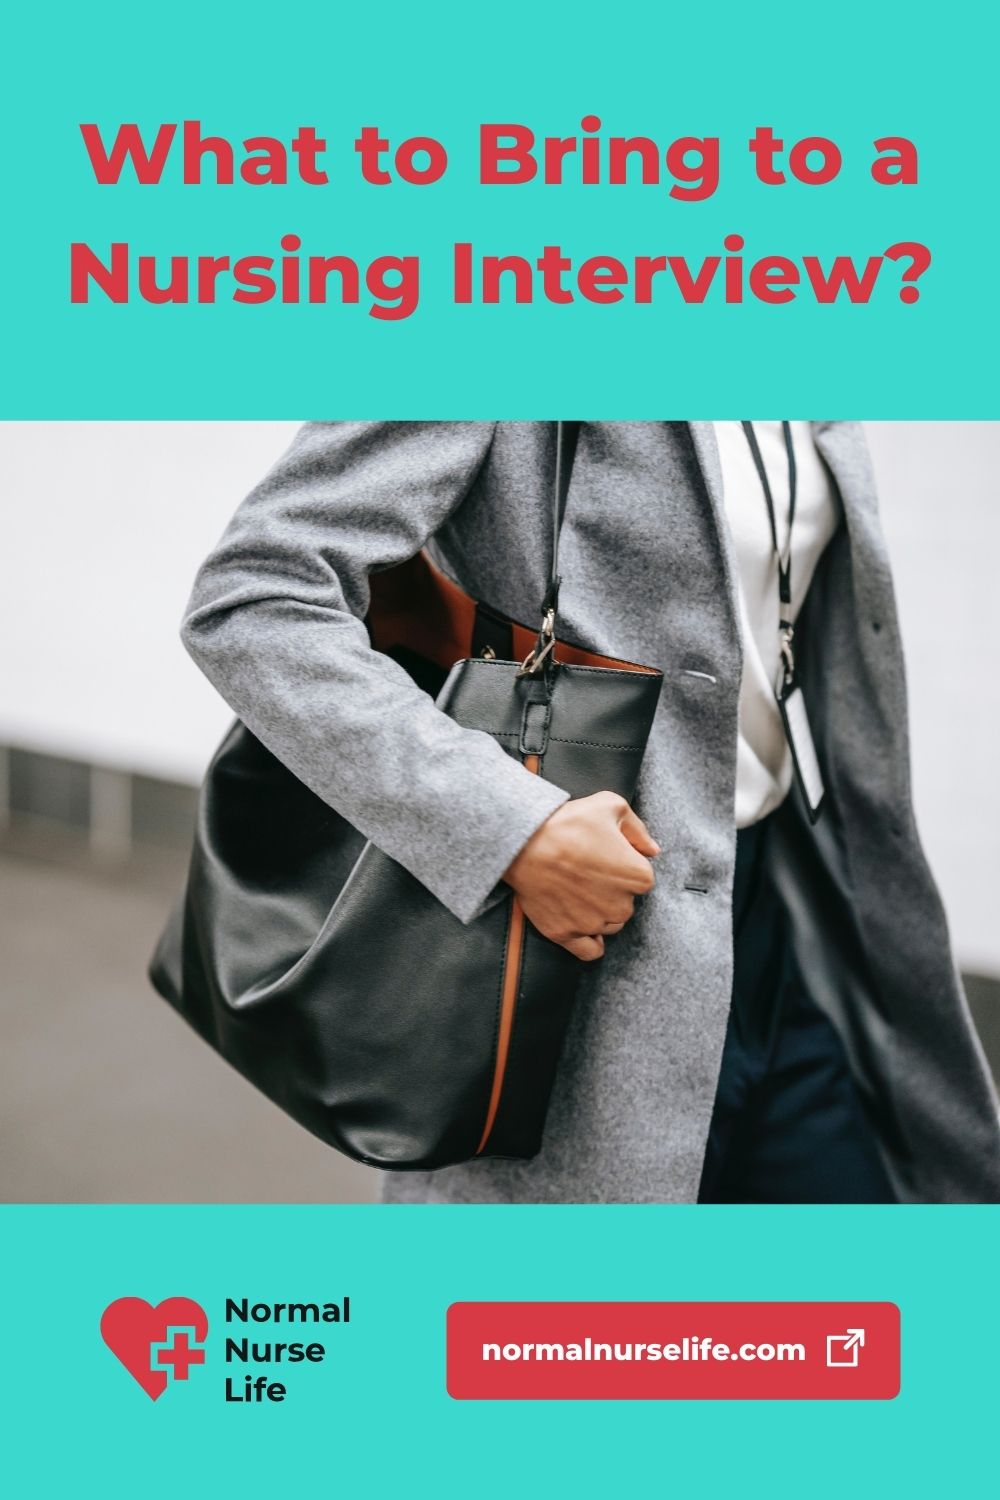 What to take to a nursing interview